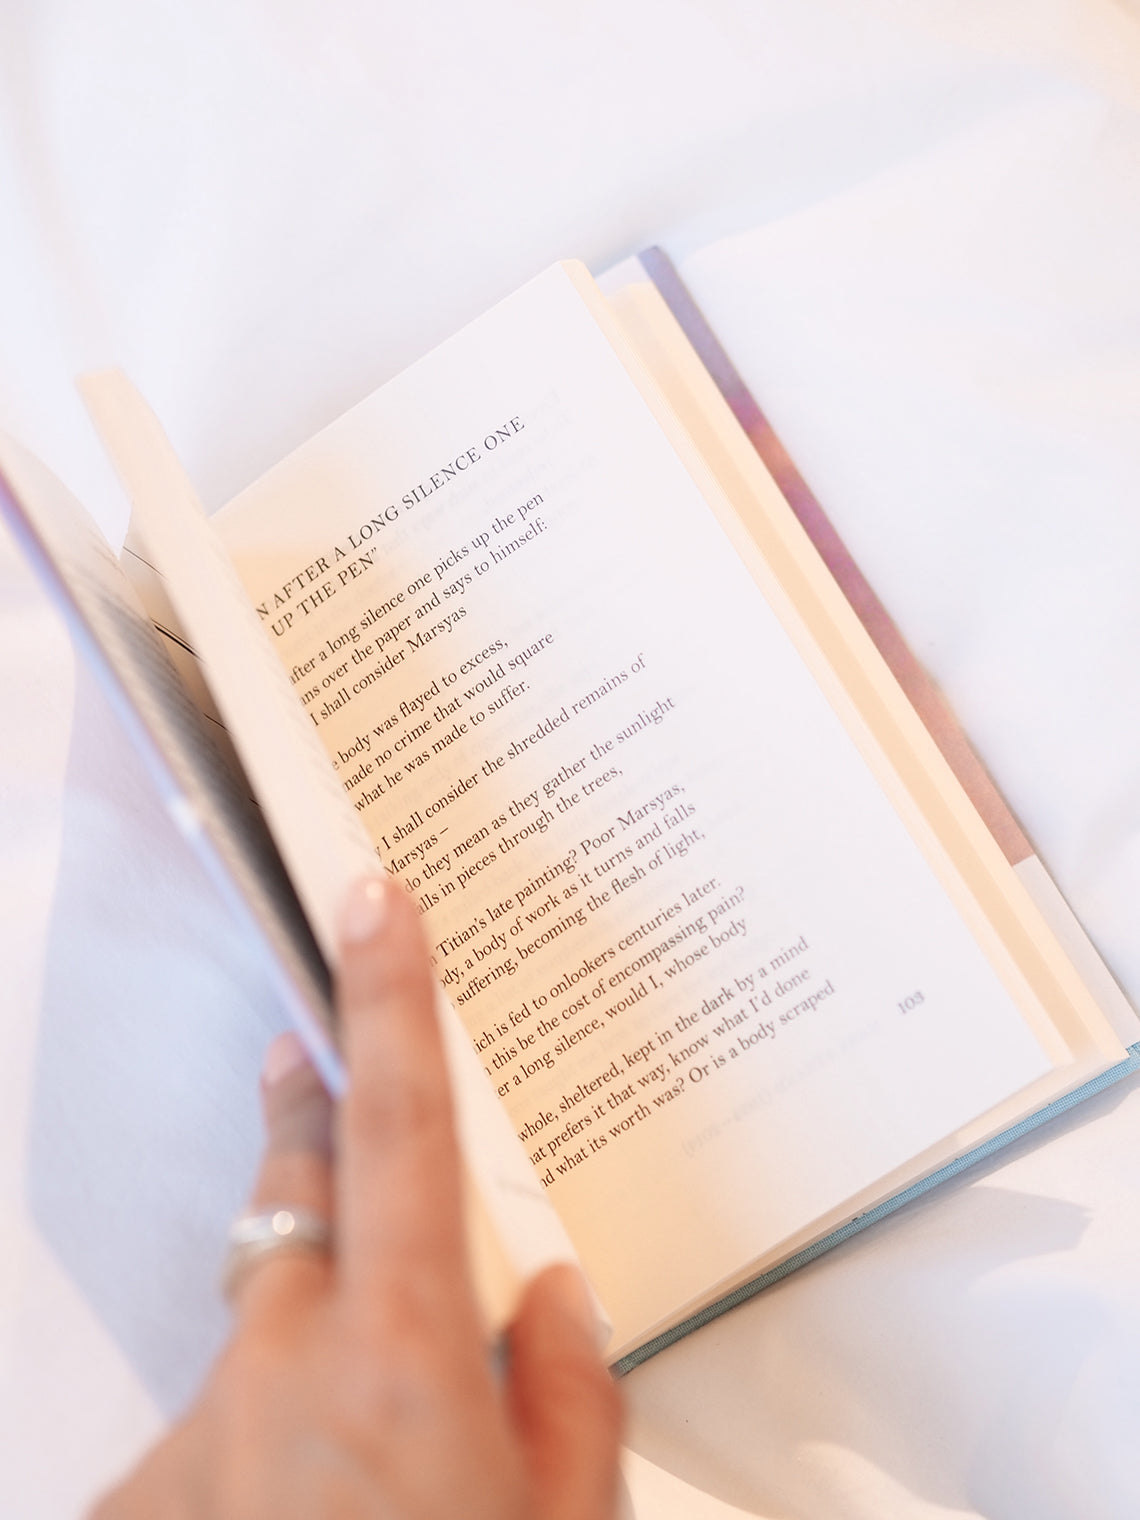 Poems of Healing Book